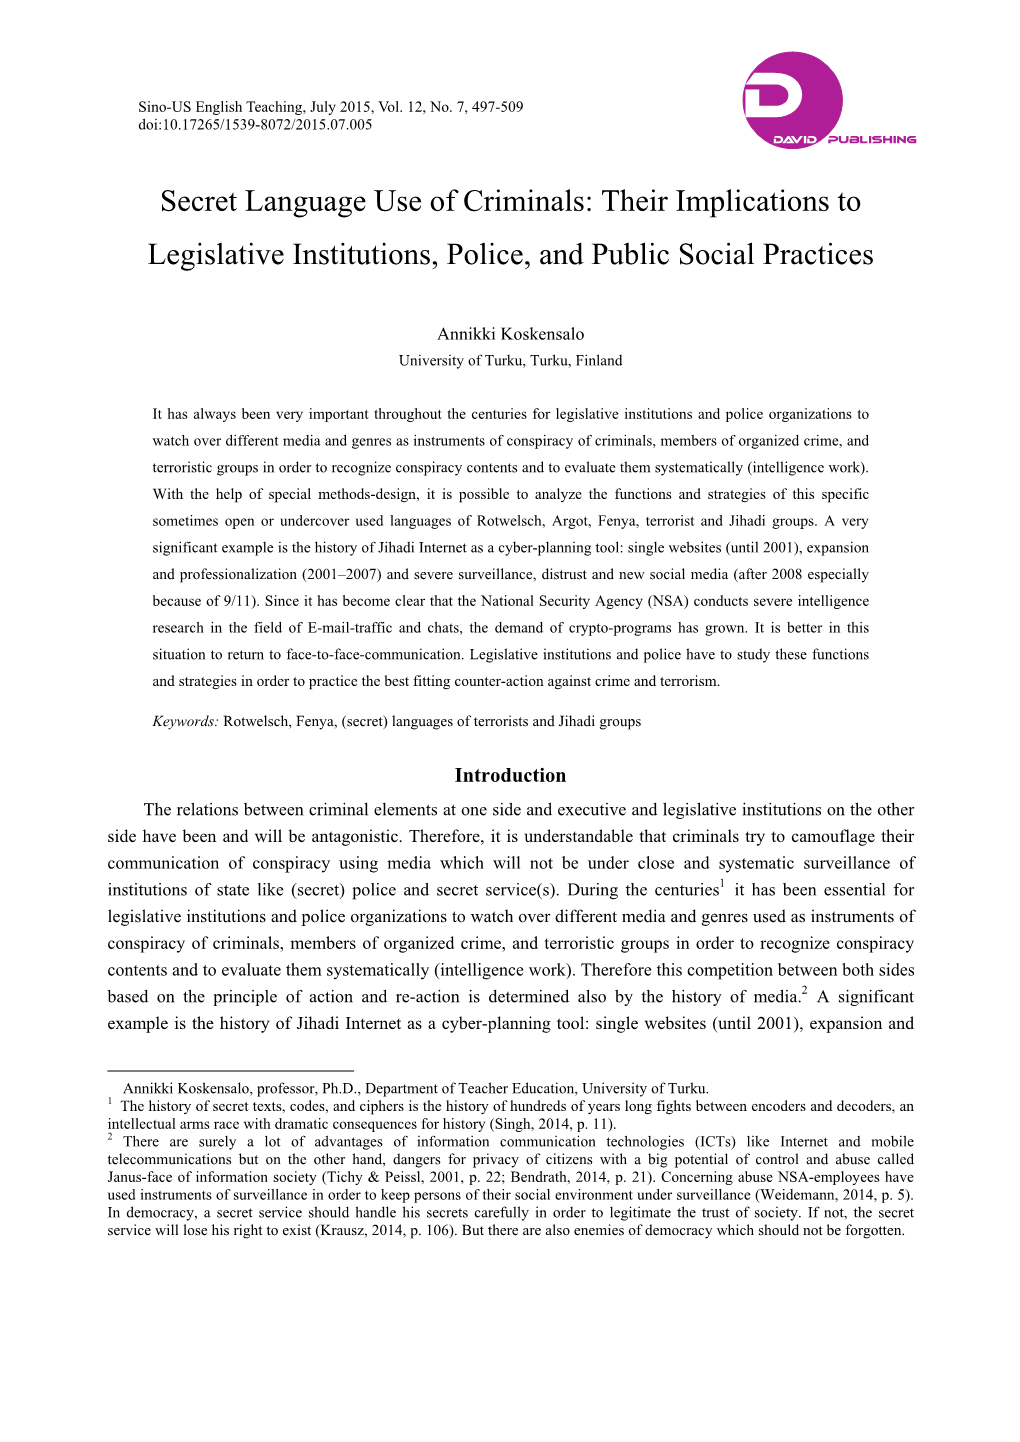 Secret Language Use of Criminals: Their Implications to Legislative Institutions, Police, and Public Social Practices